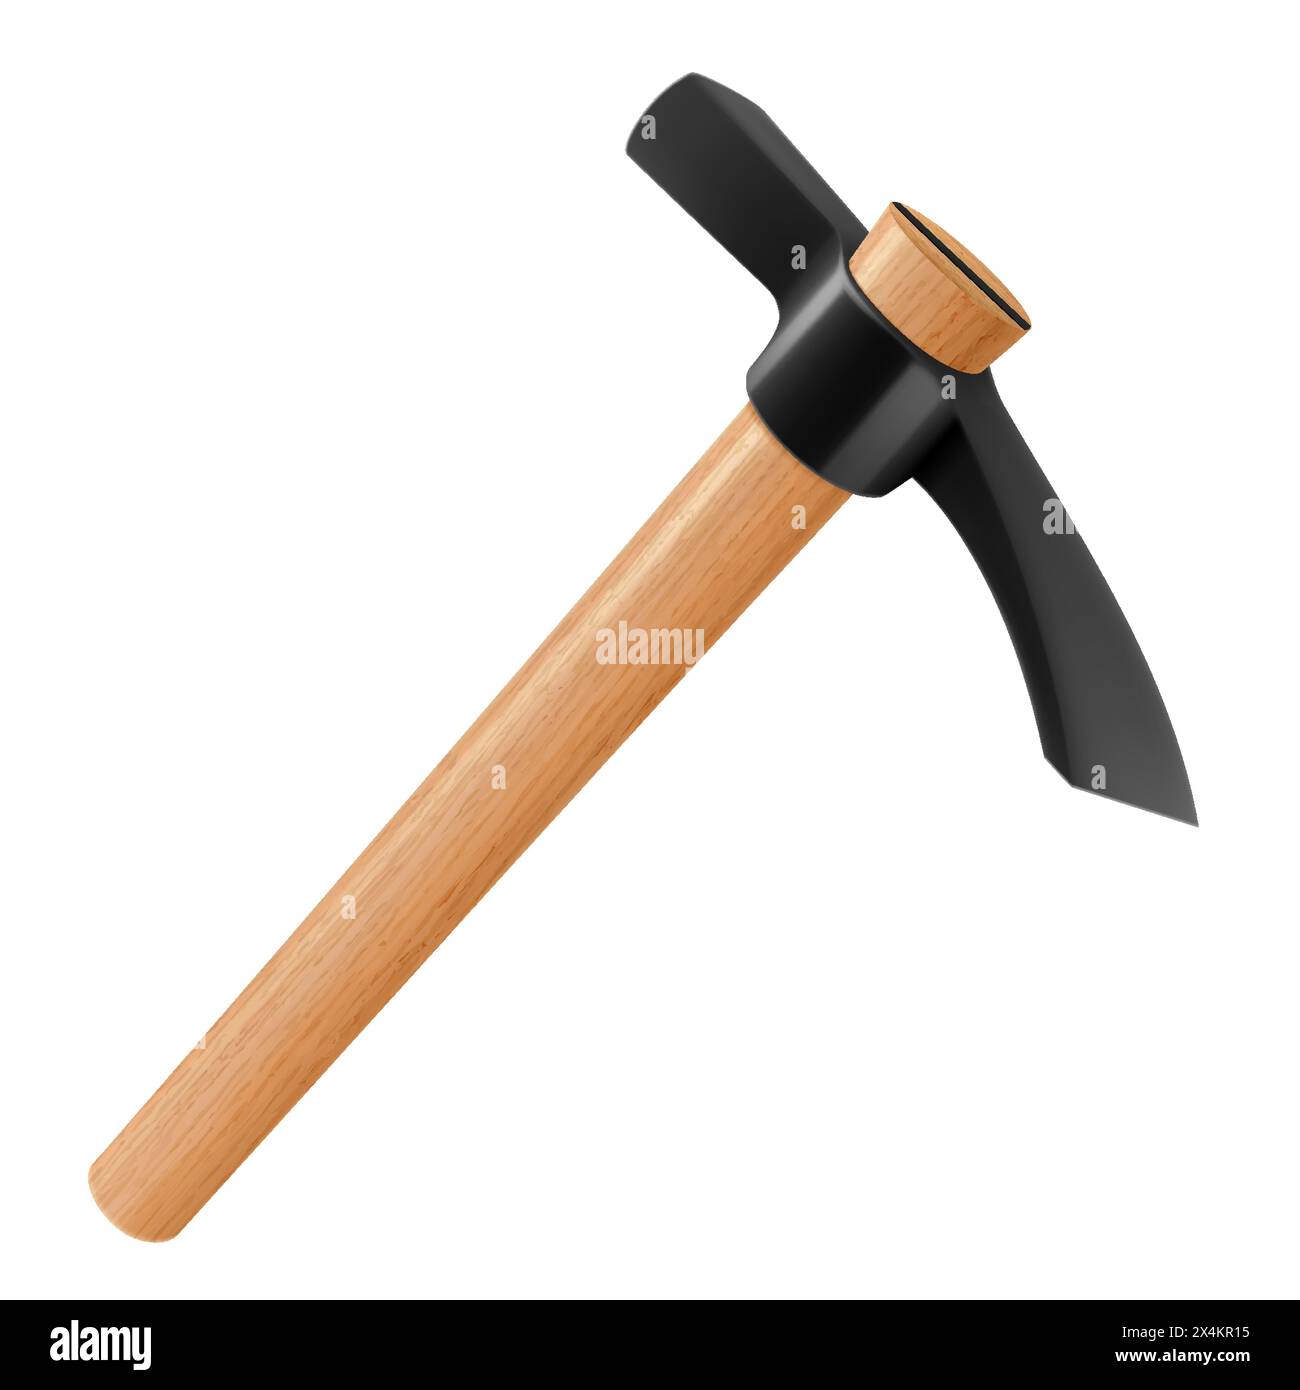 Pickaxe hammer isolated on white background. Rock hammer tool. Hand percussion tool for master stonemasons, builders, sculptors for processing various Stock Vector